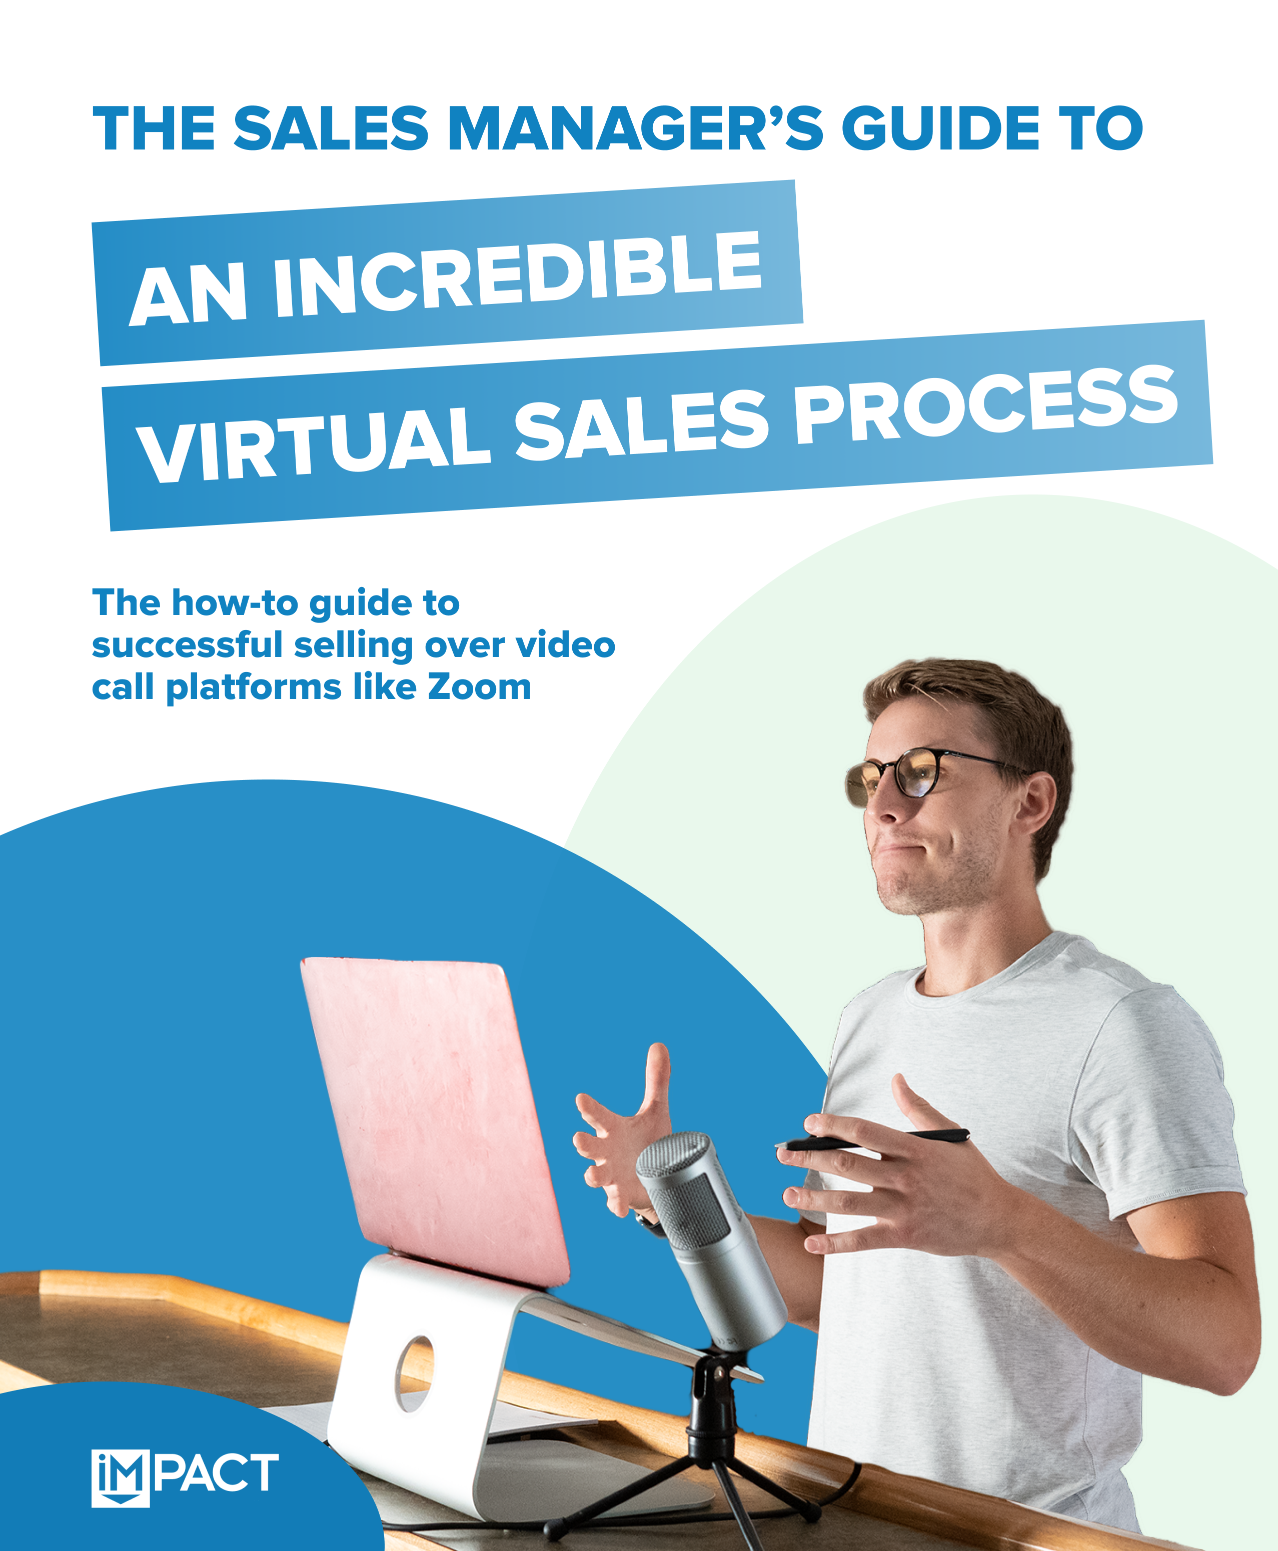 The Sales Manager's Guide to an Incredible Virtual Sales Process